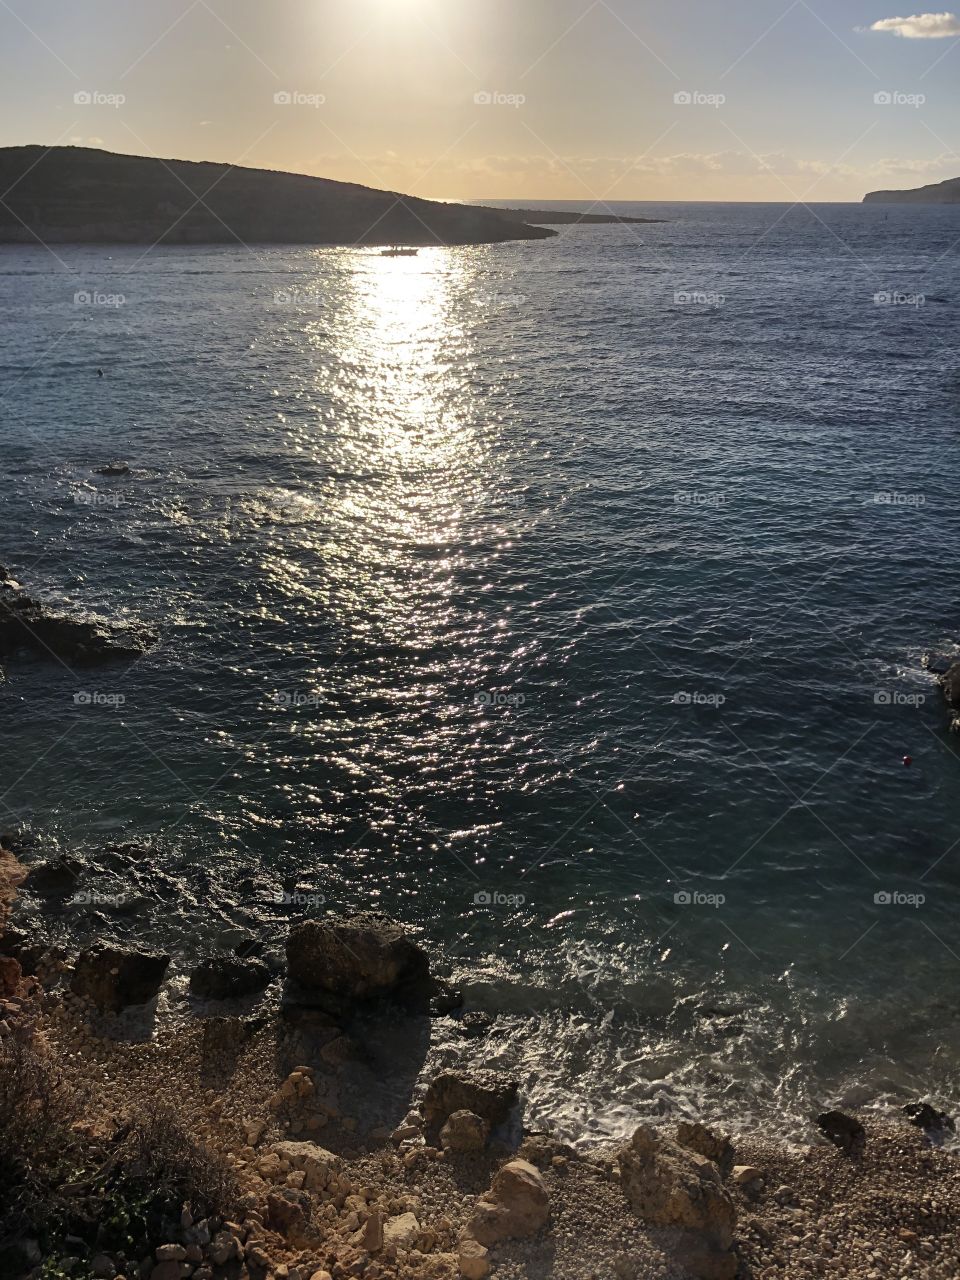 A striking sunset view from the hillside overlooking the gorgeous Blue Lagoon in Comino, Malta. 